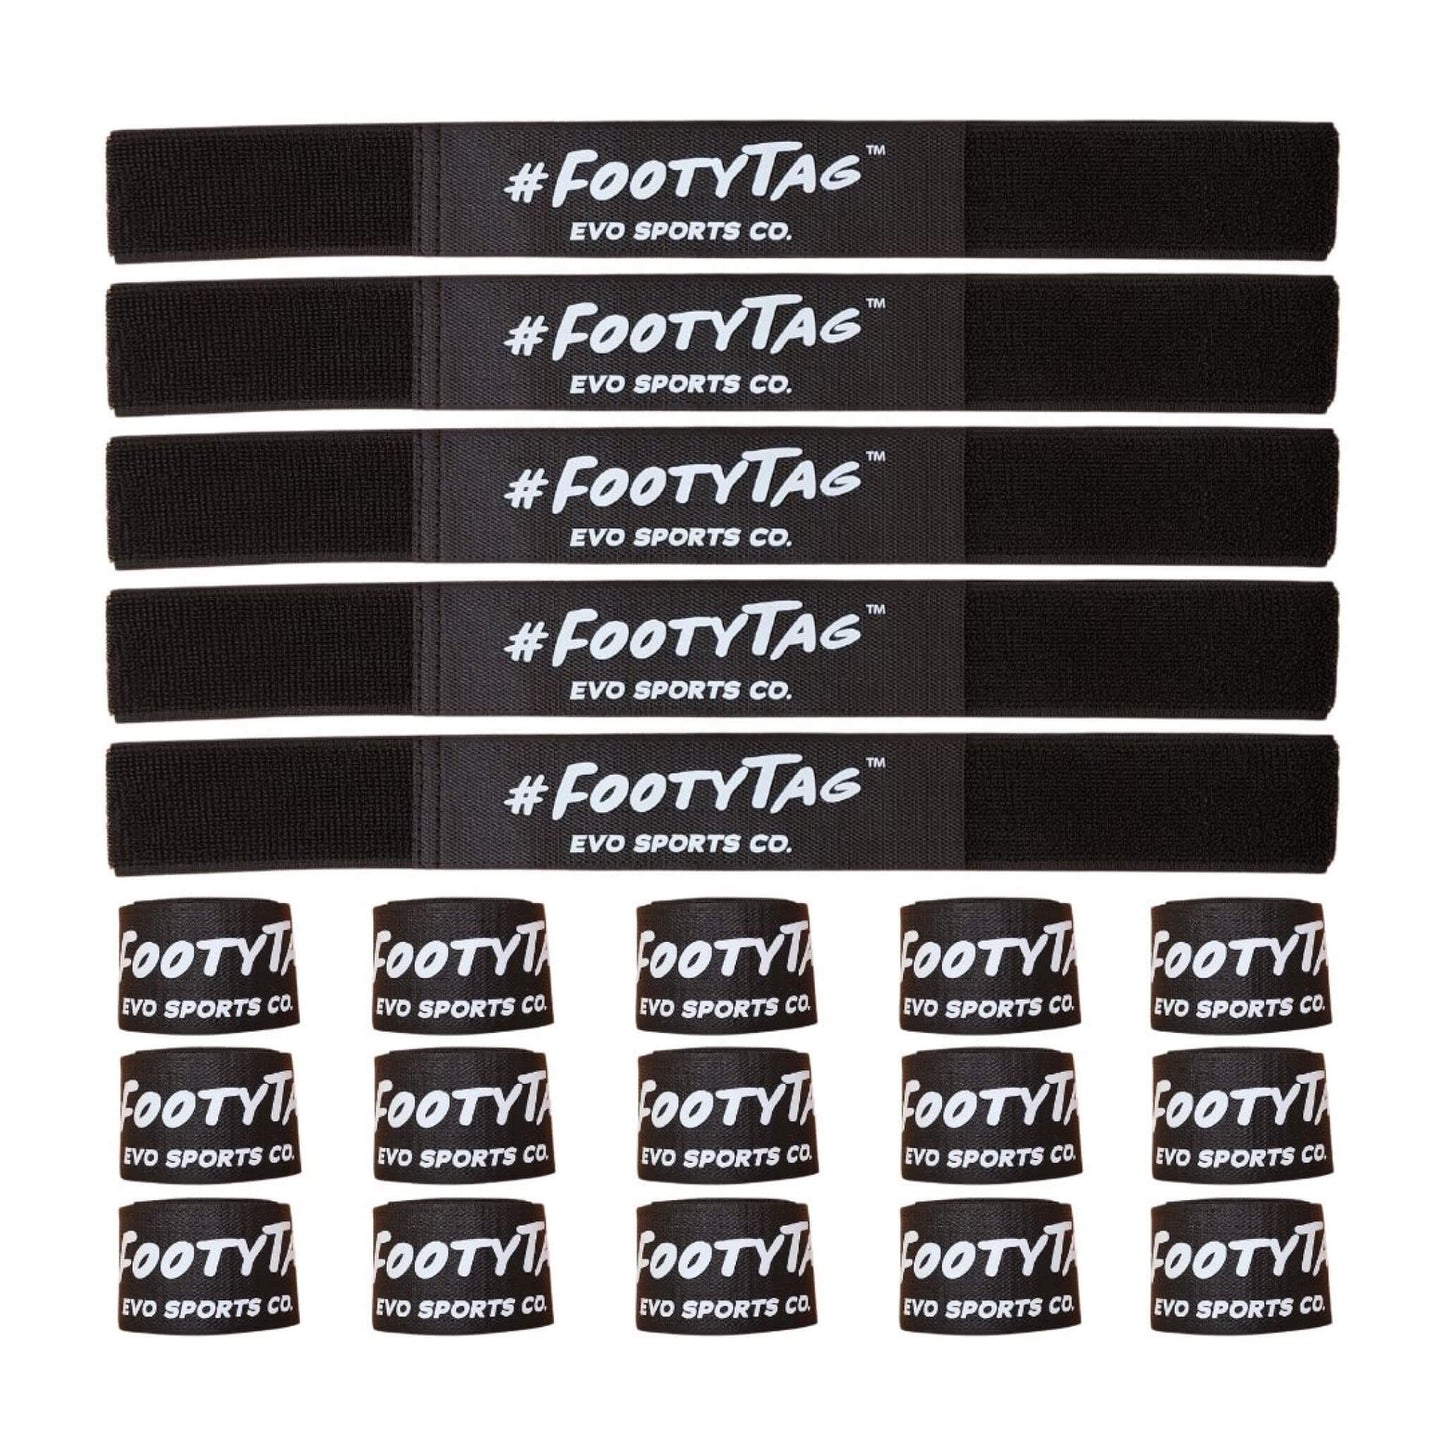 Tag Rugby Belts - Evo Sports Co